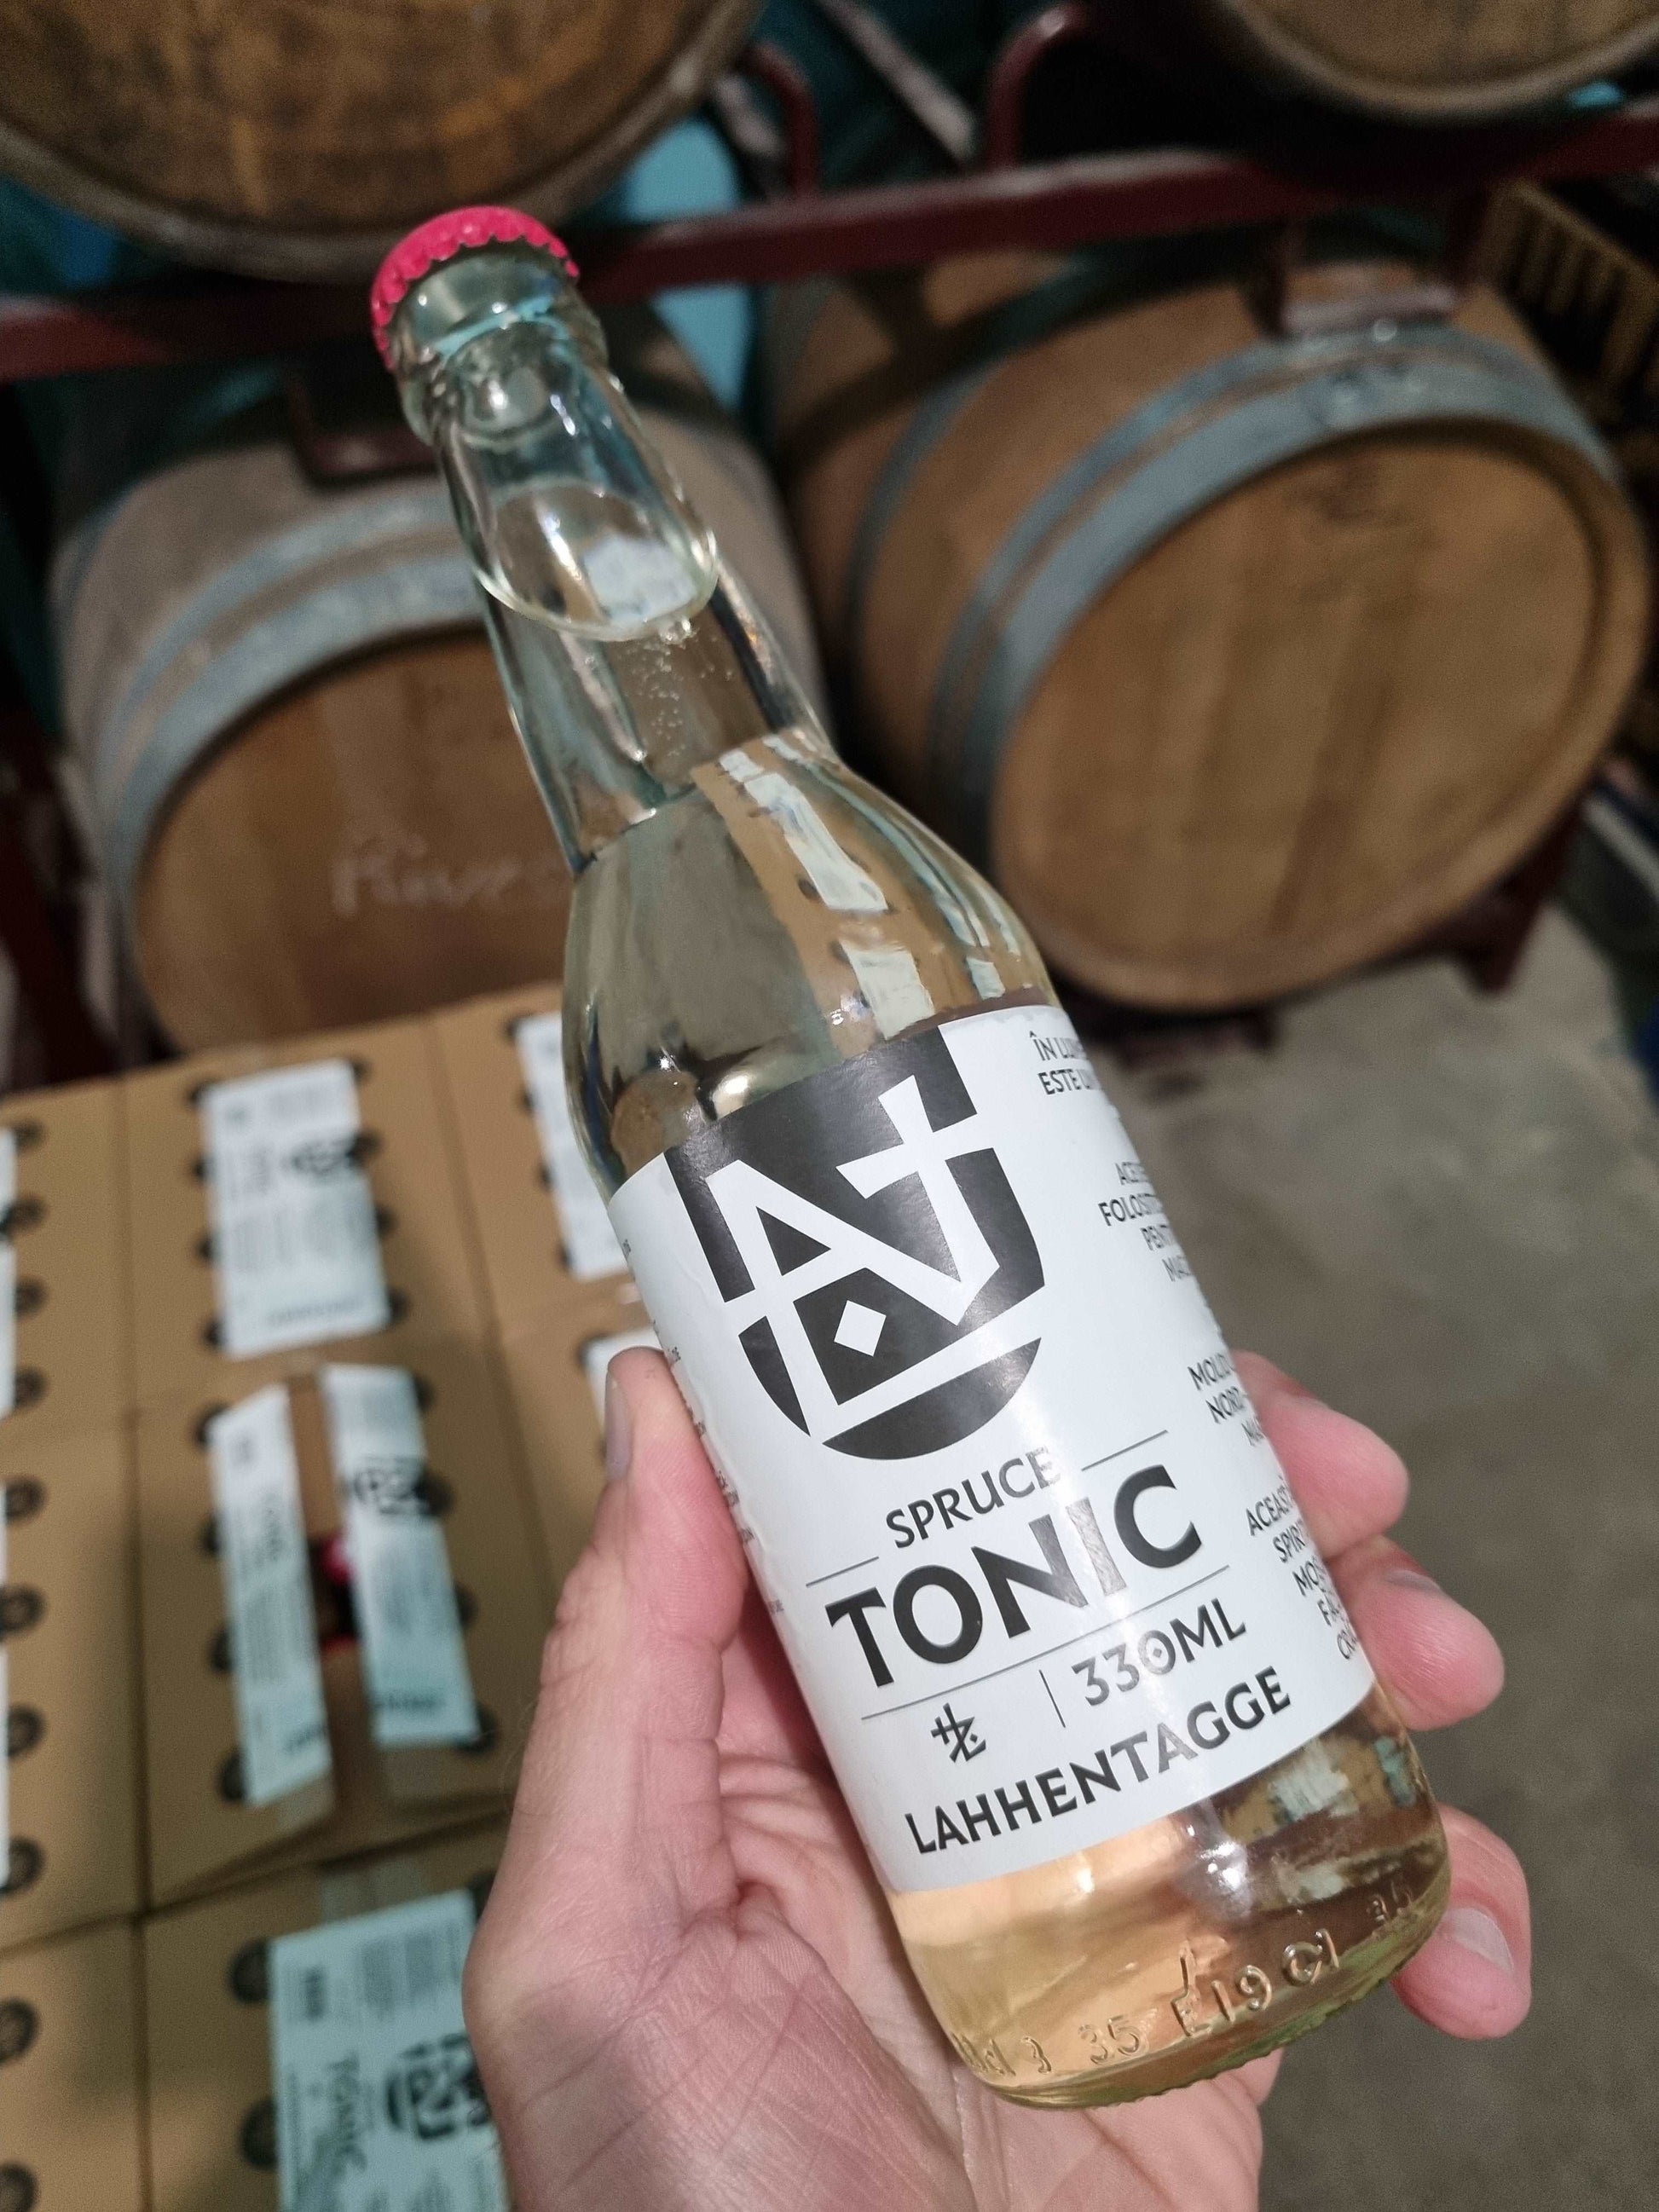 6 x Lahhentagge Spruce tonic (0 % alc)